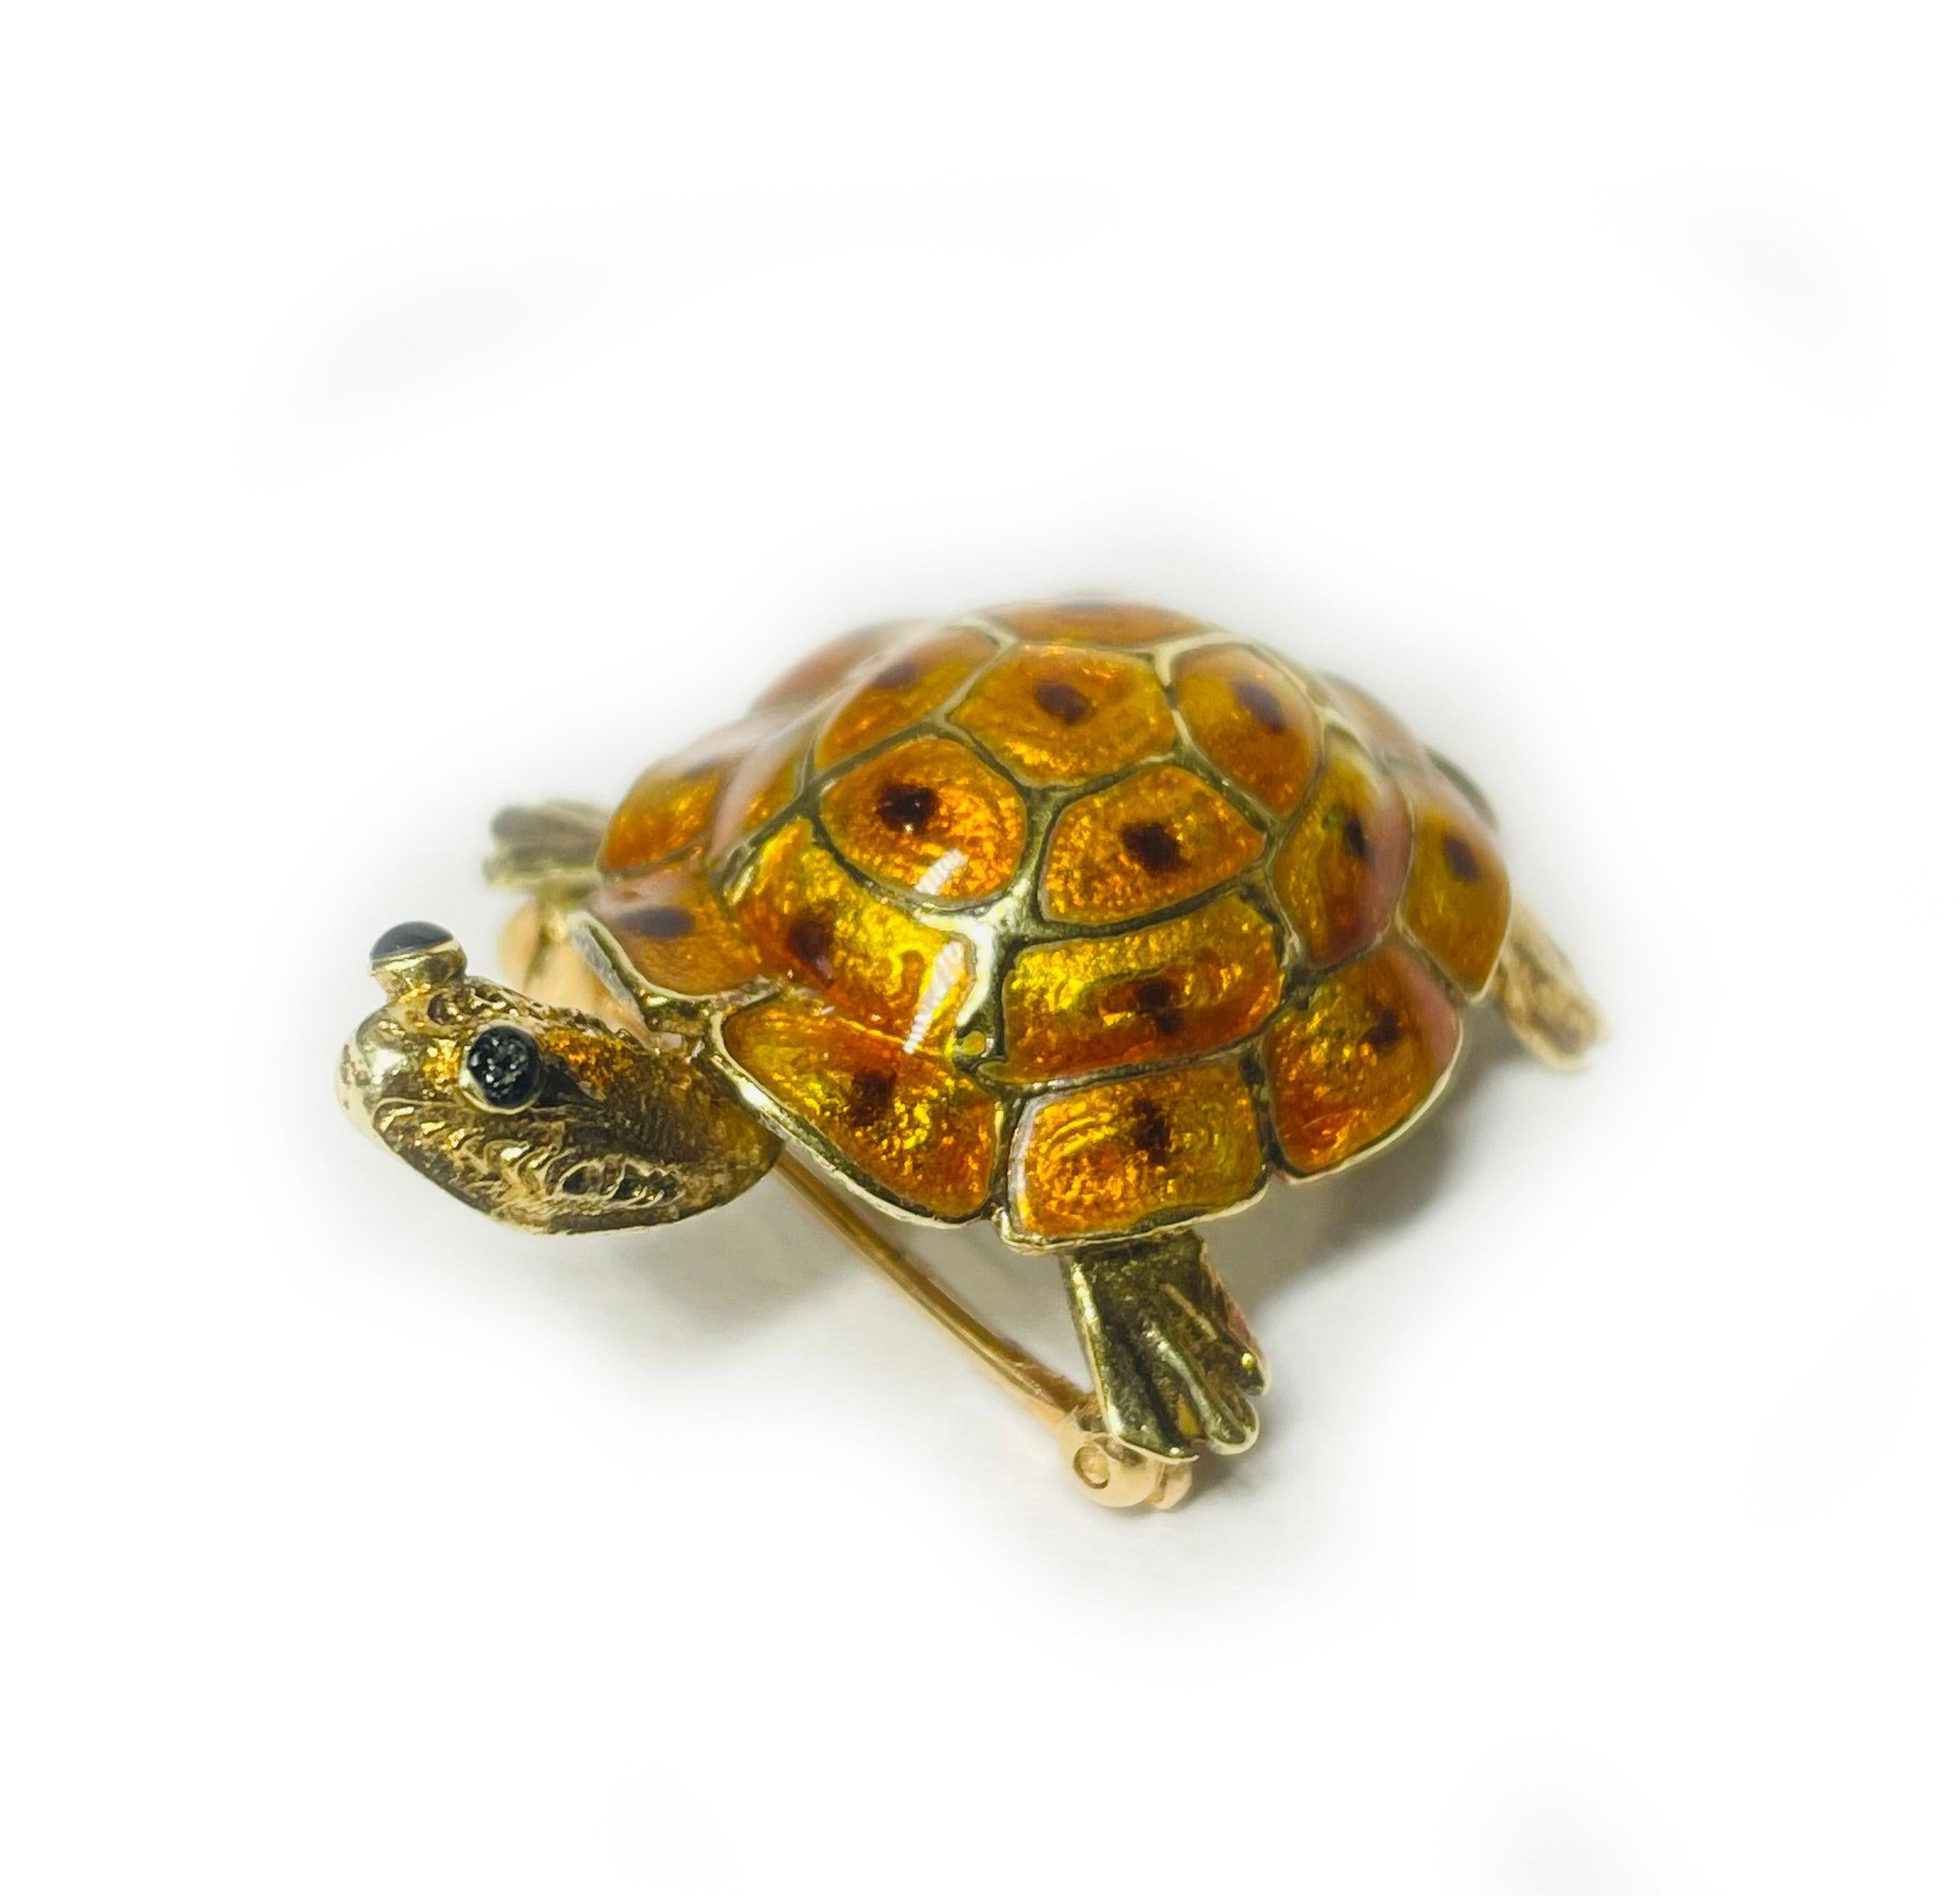 Elevate your style with this beautiful 14K yellow gold turtle pin weighing 6.57 grams, the perfect accessory for any occasion.

Please note, when item is out of stock it takes 2-3 weeks after a order is placed.

A free online diamond appraisal is